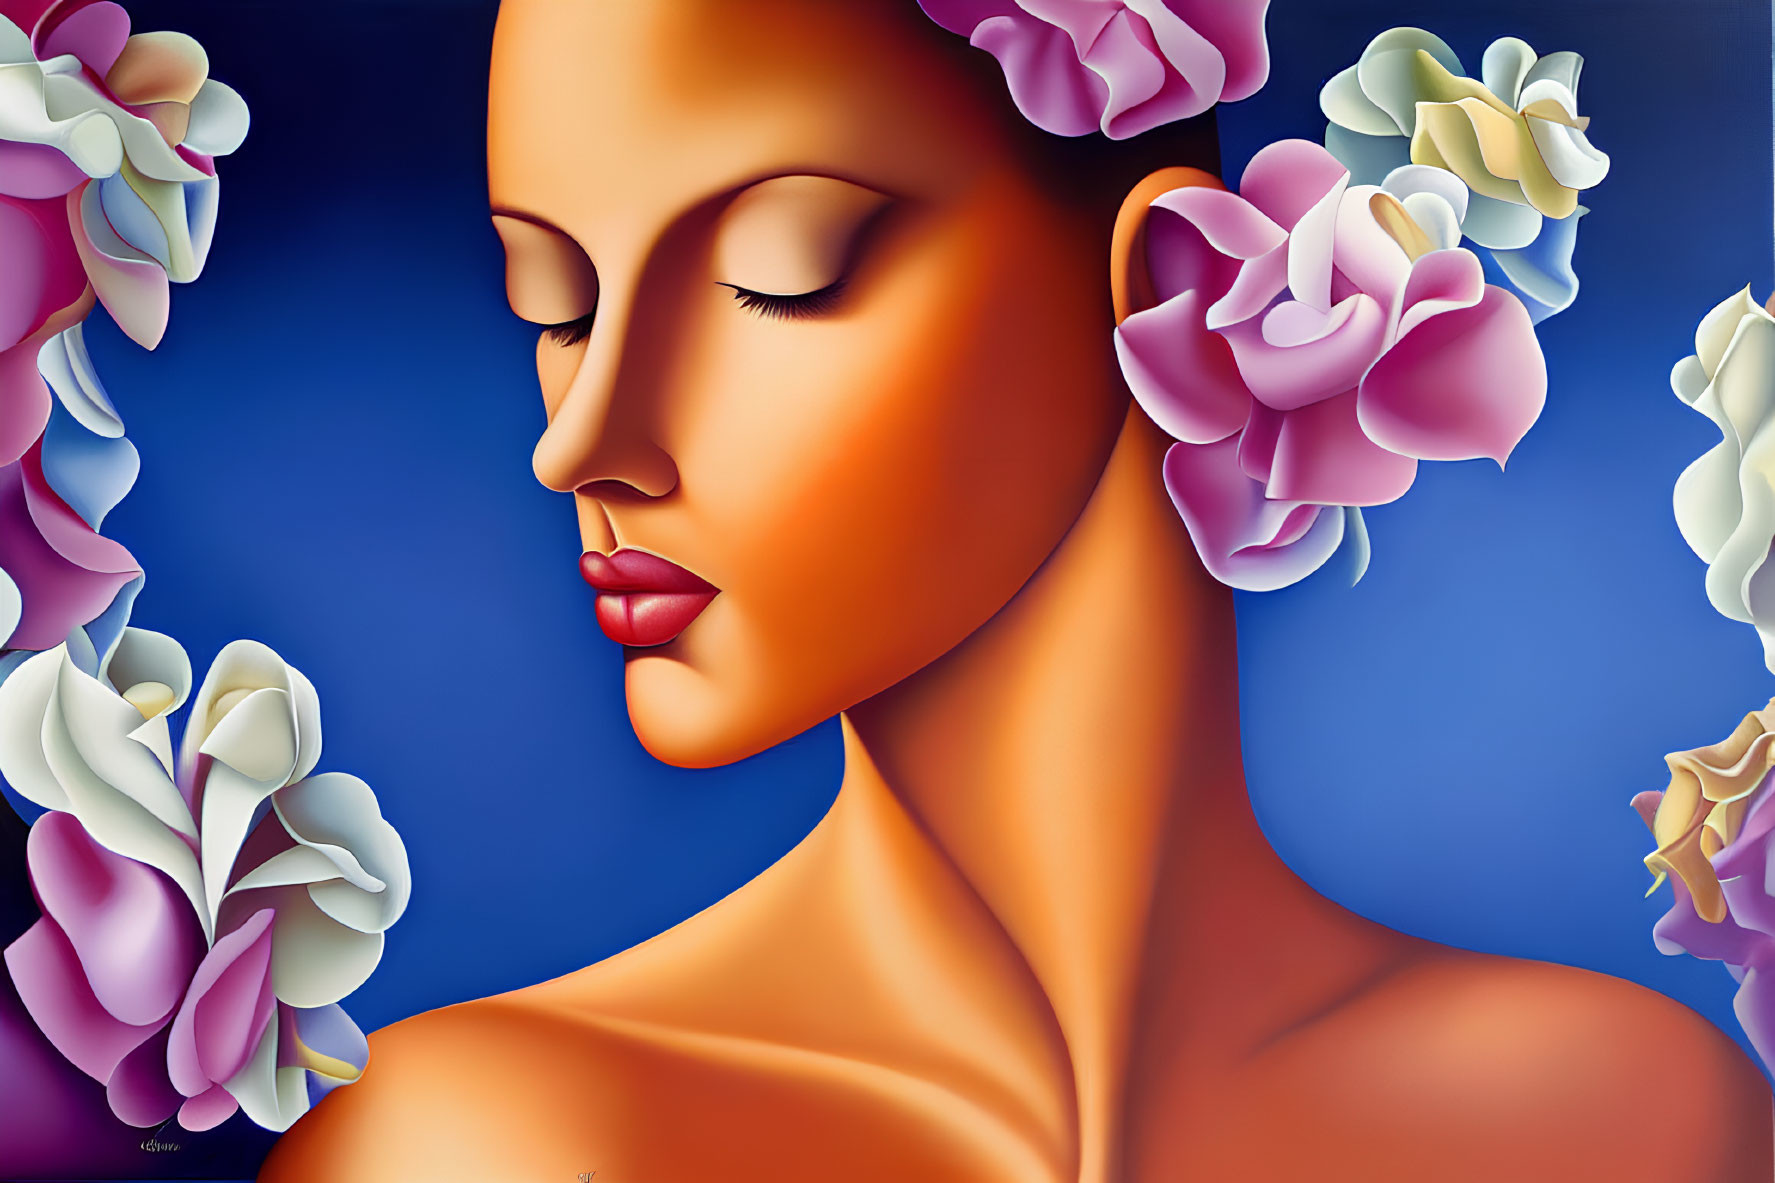 Stylized portrait of woman with closed eyes and floral hair on blue background